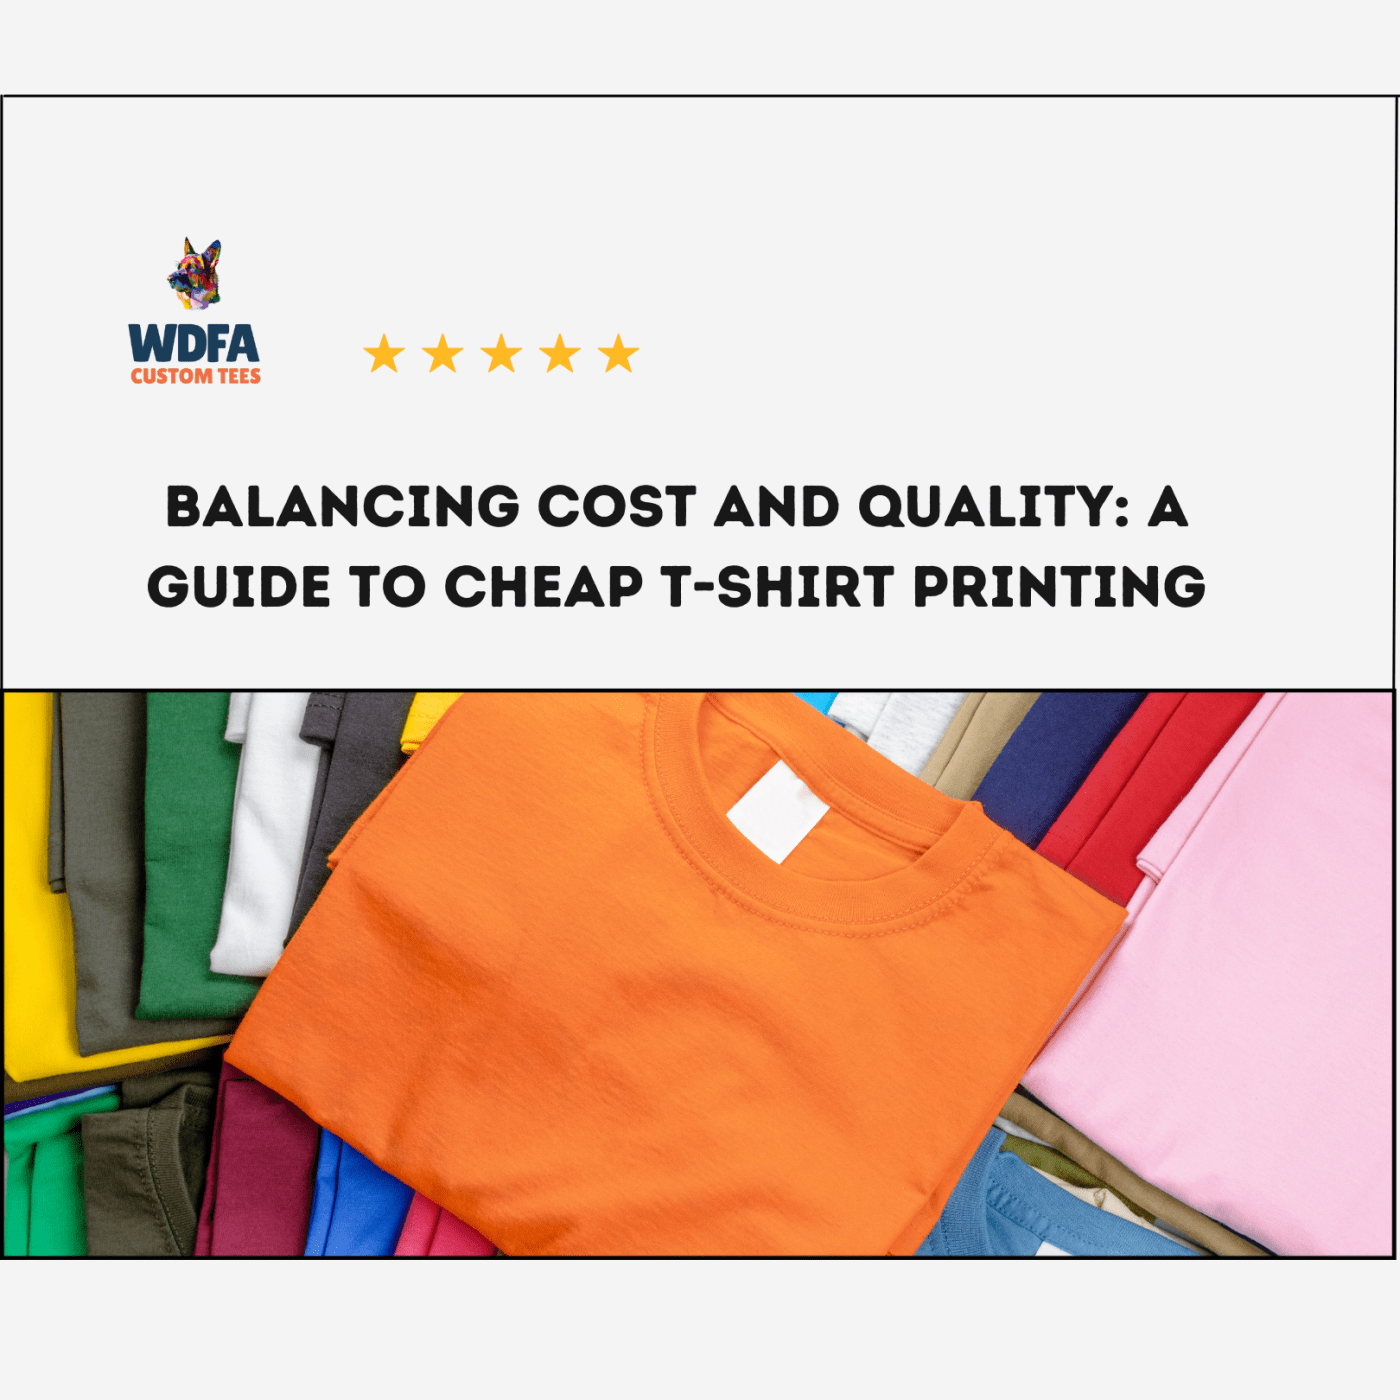 Balancing Cost and Quality: A Guide to Cheap T-Shirt Printing - custom t shirts, t-shirt printing, tshirt printing, fremont newark union city hayward san jose san francisco, personalized t-shirts - custom t shirts, t-shirt printing, tshirt printing, fremont newark union city hayward san jose san francisco, personalized t-shirts